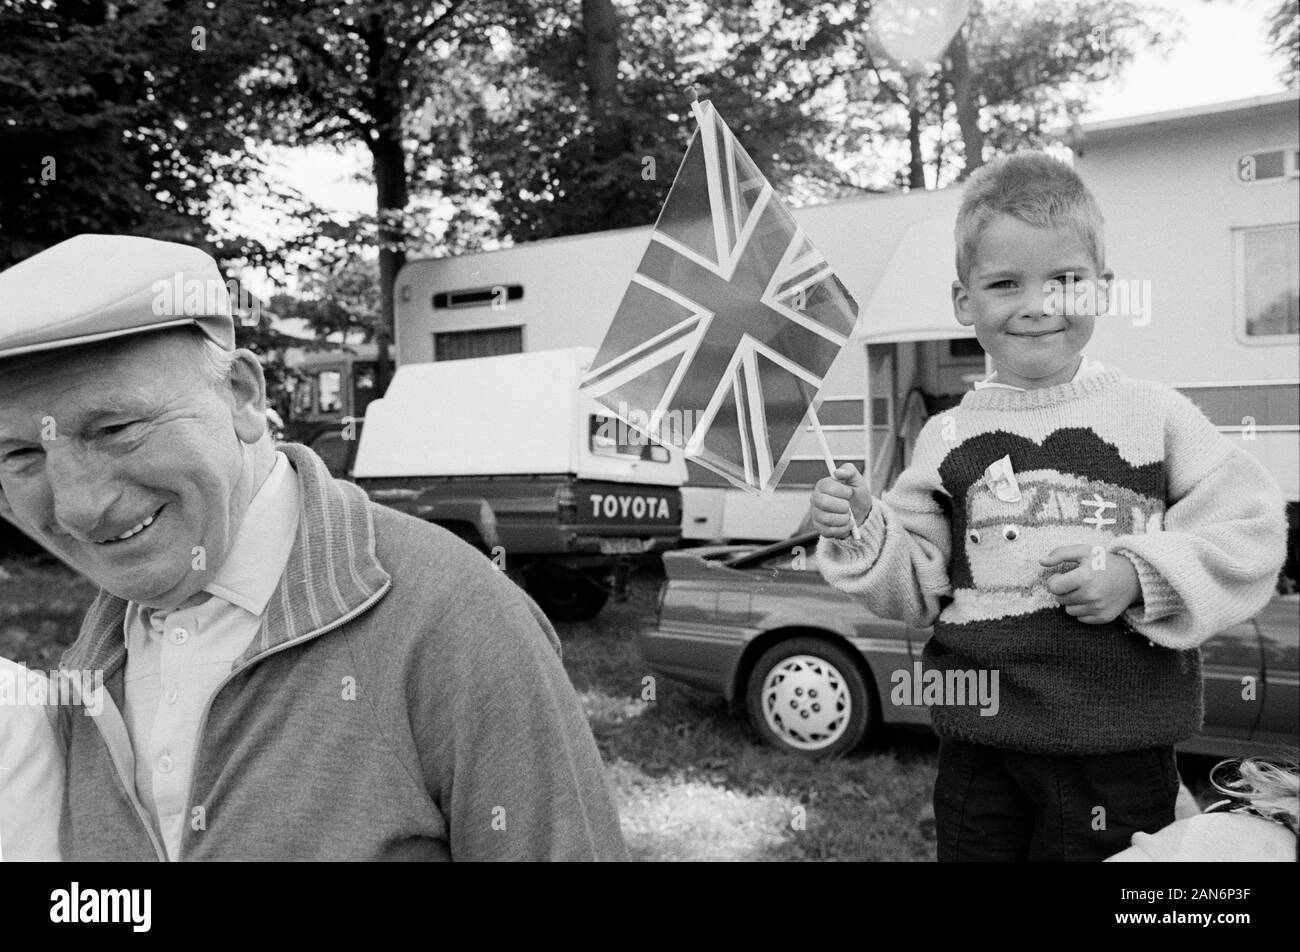 Man with flat cap and child with Union Jack with Toyota Car, Keighley Gala, West Yorkshire 1990. Stock Photo